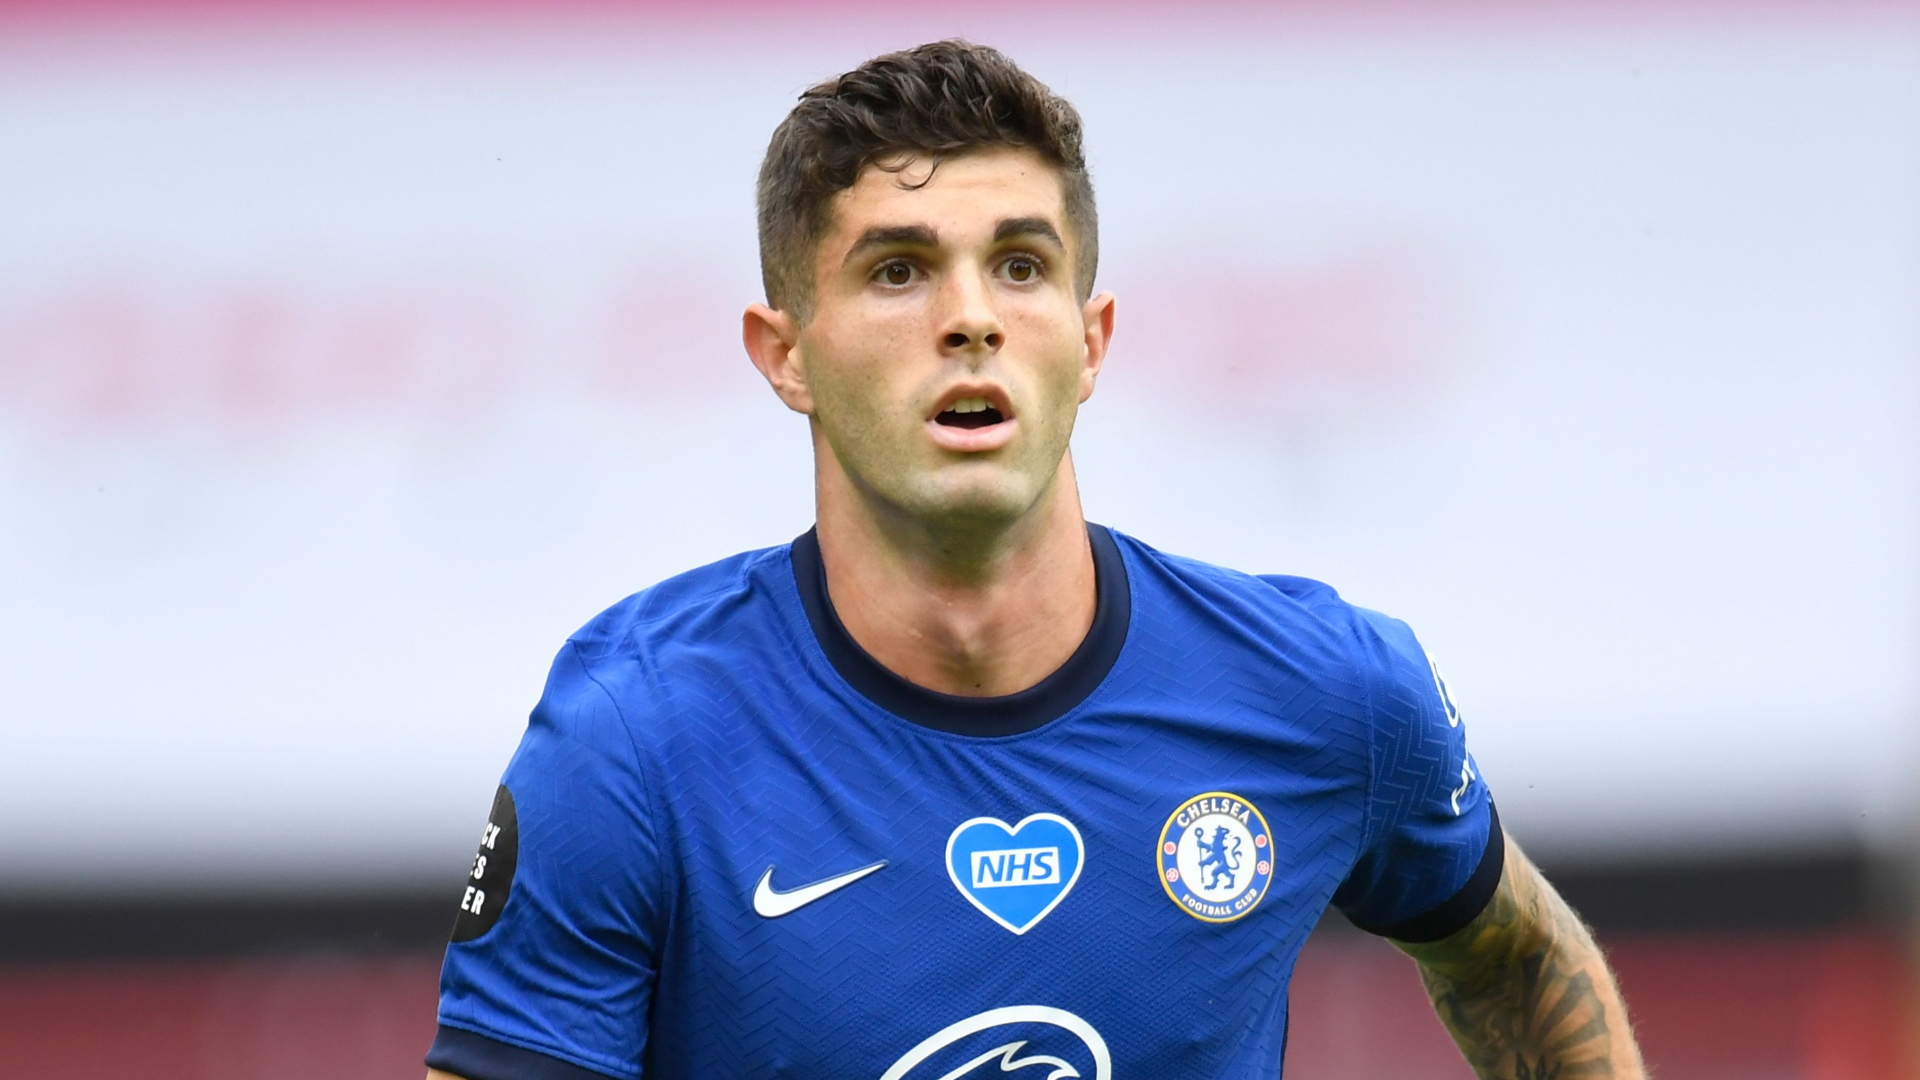 Chelsea star Pulisic set for hamstring scan after suffering injury in